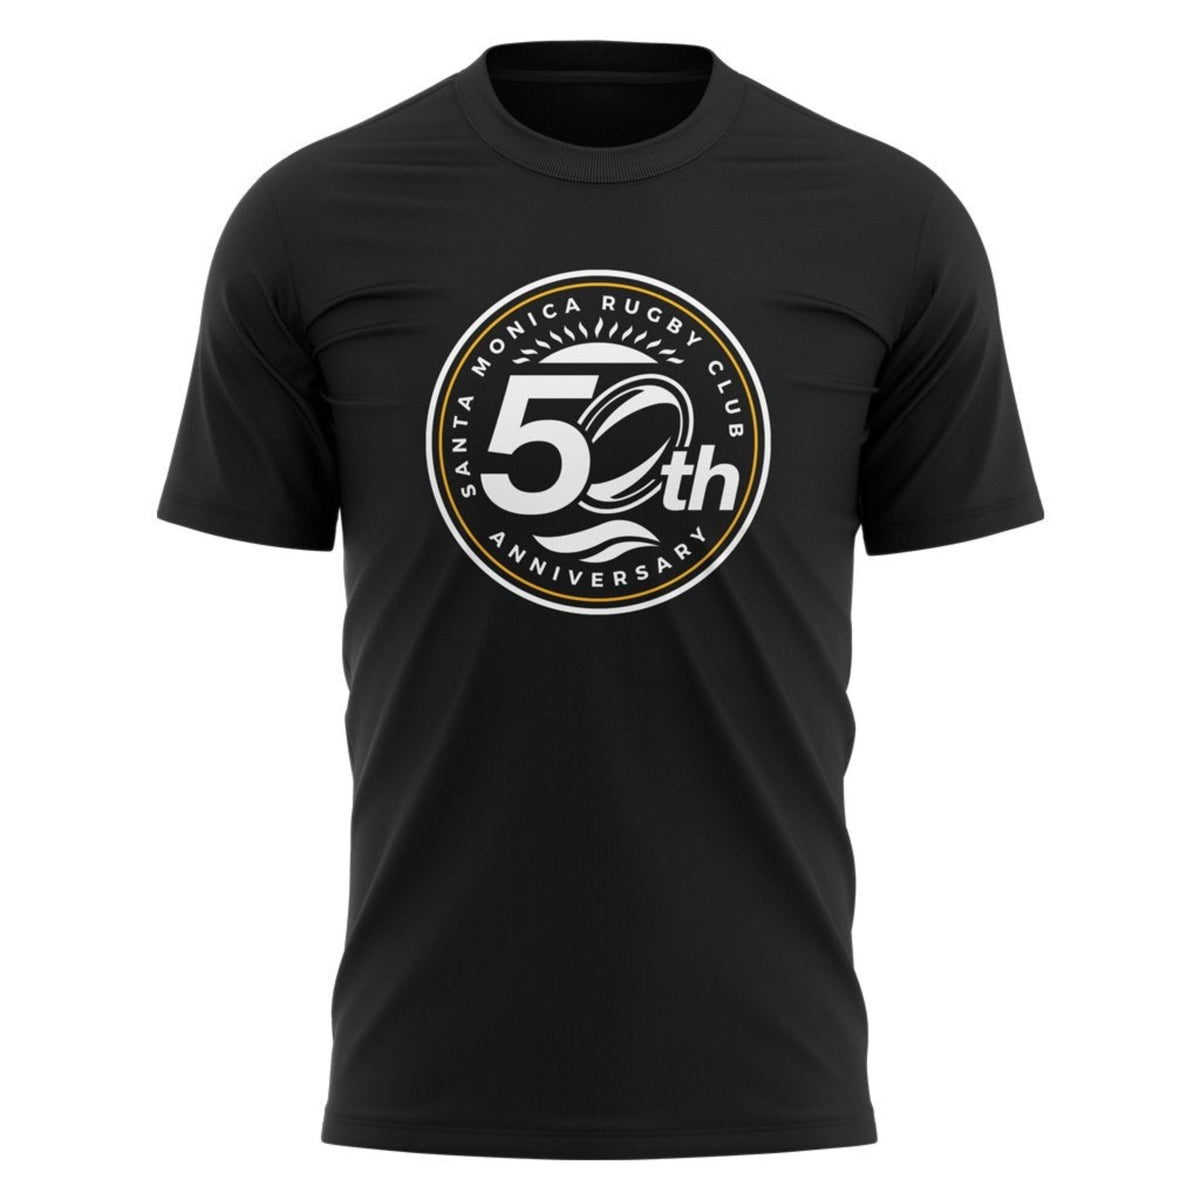 Santa Monica Rugby Club &quot;50Th Anniversary&quot; Tee - Men&#39;s Black Or Grey - www.therugbyshop.com www.therugbyshop.com MEN&#39;S / BLACK / S XIX Brands TEES Santa Monica Rugby Club &quot;50Th Anniversary&quot; Tee - Men&#39;s Black Or Grey